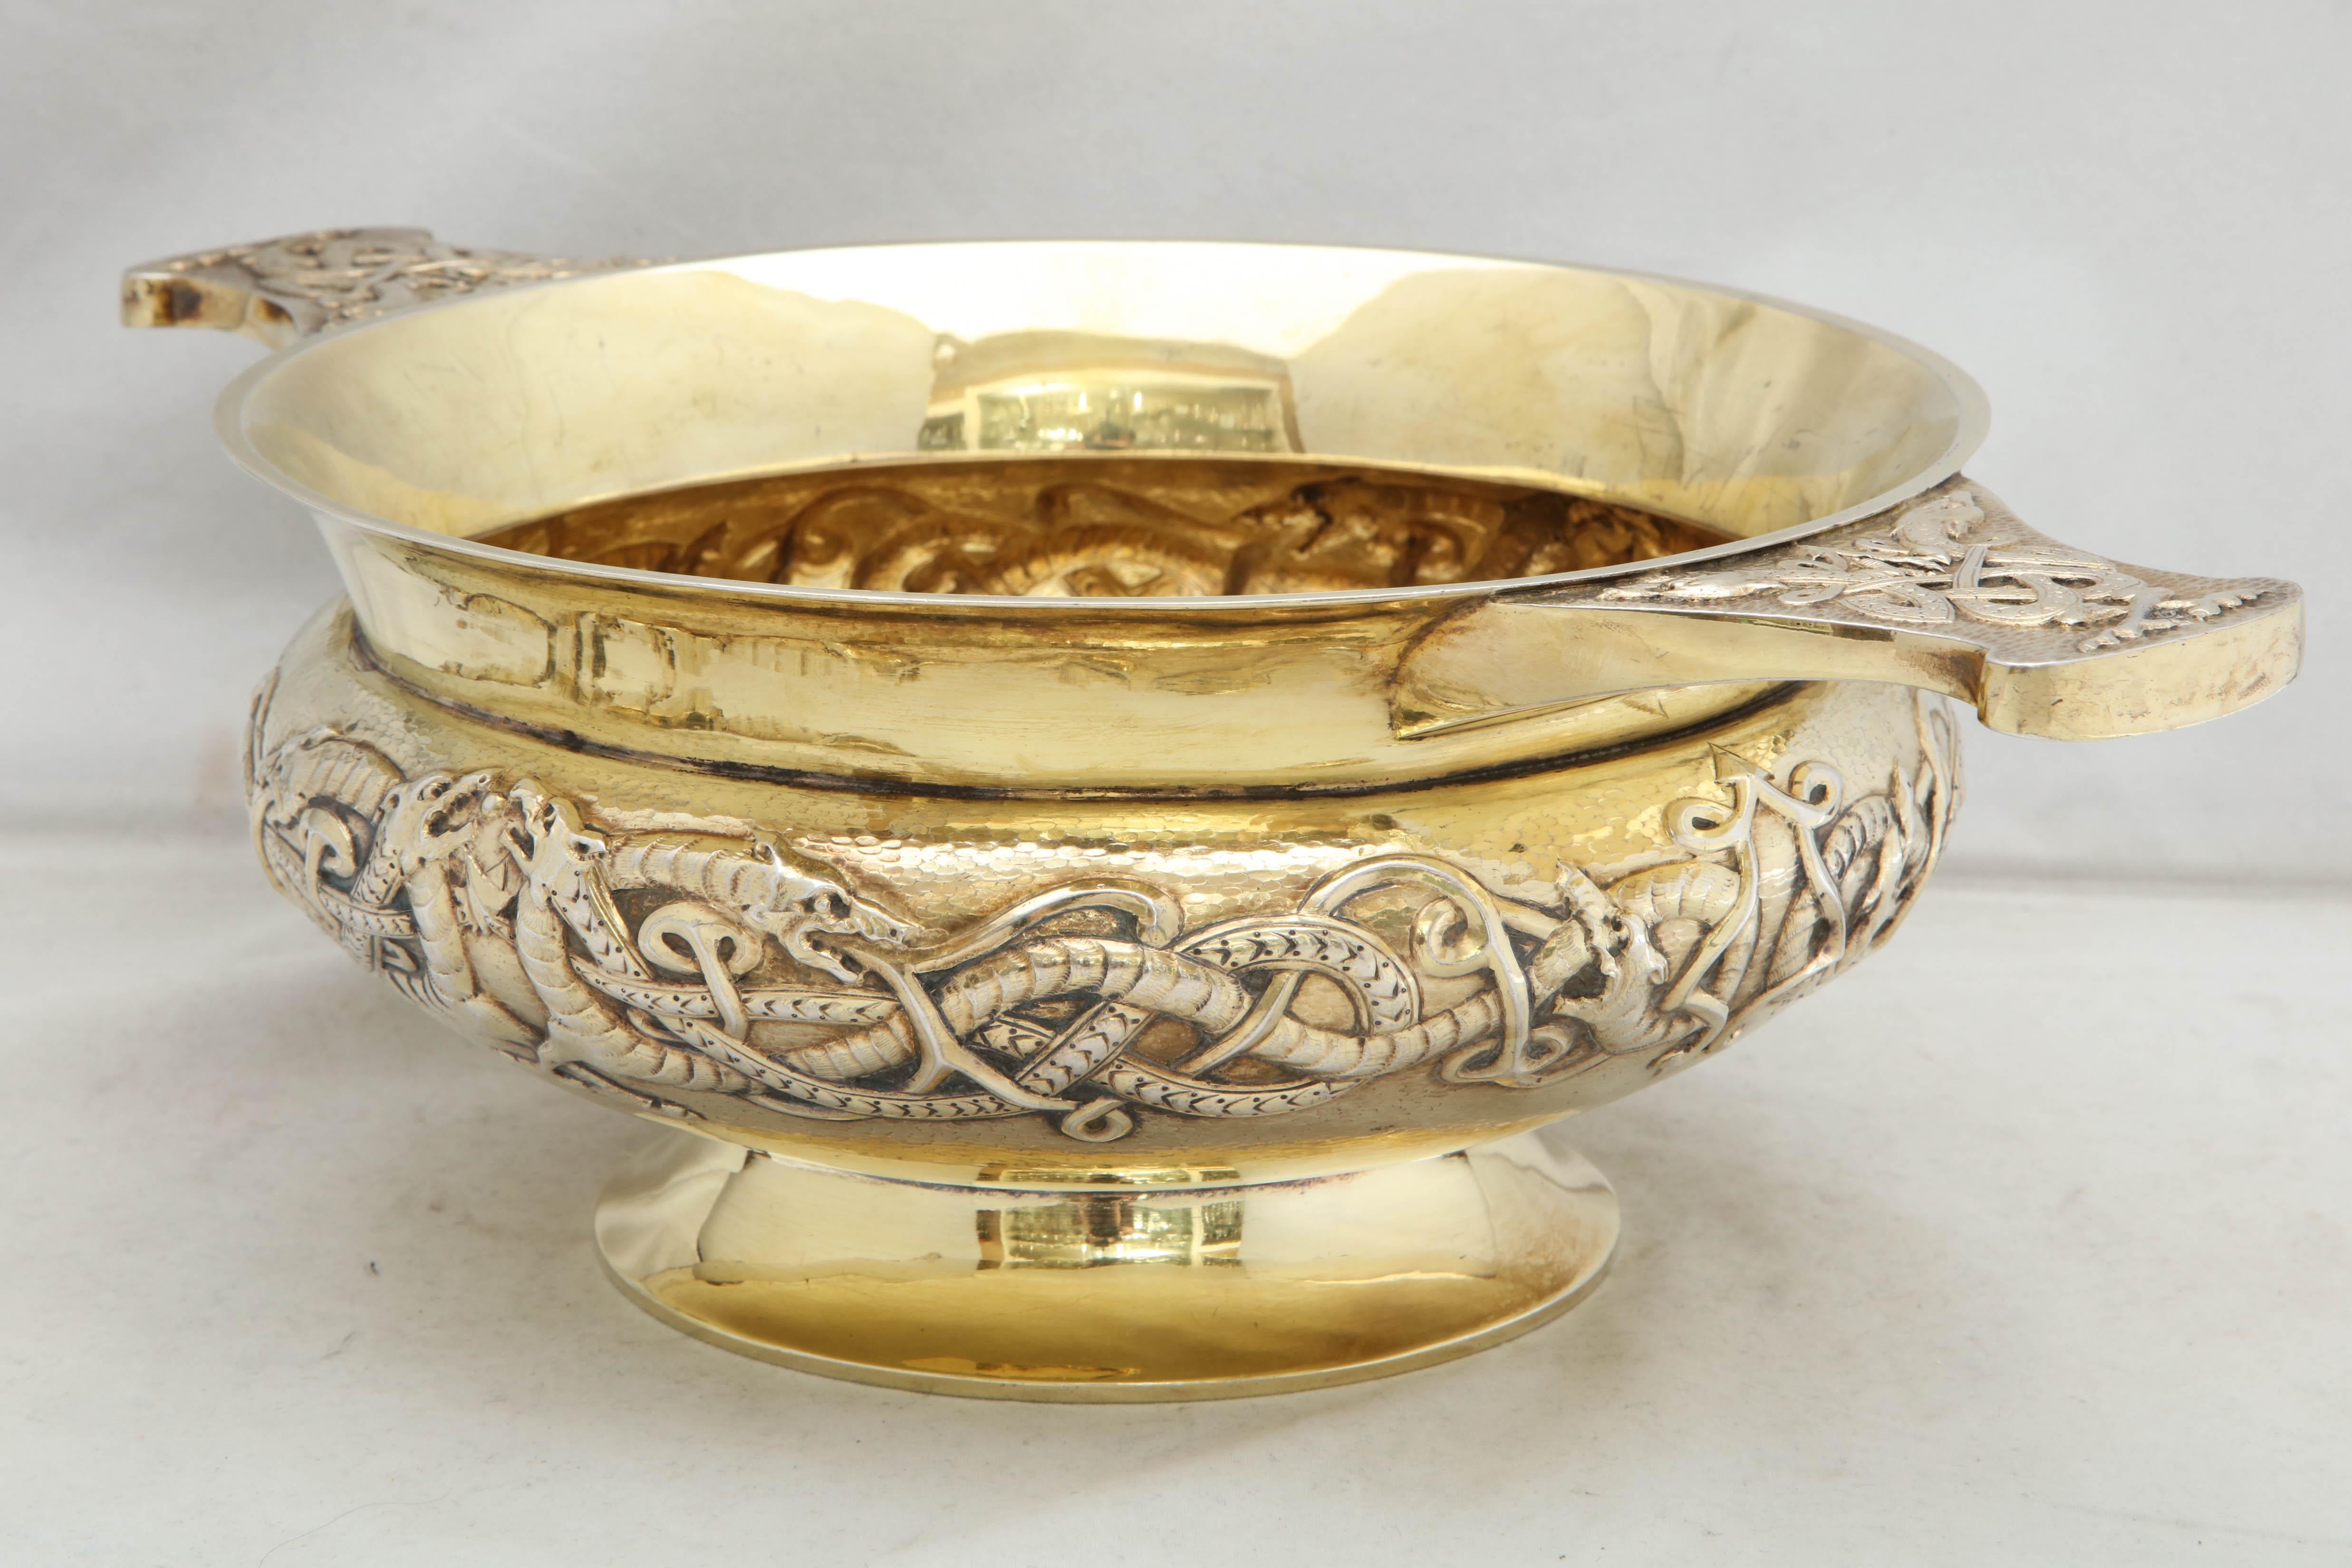 Early 20th Century Edwardian Period Sterling Silver-Gilt Celtic-Style Centerpiece Bowl